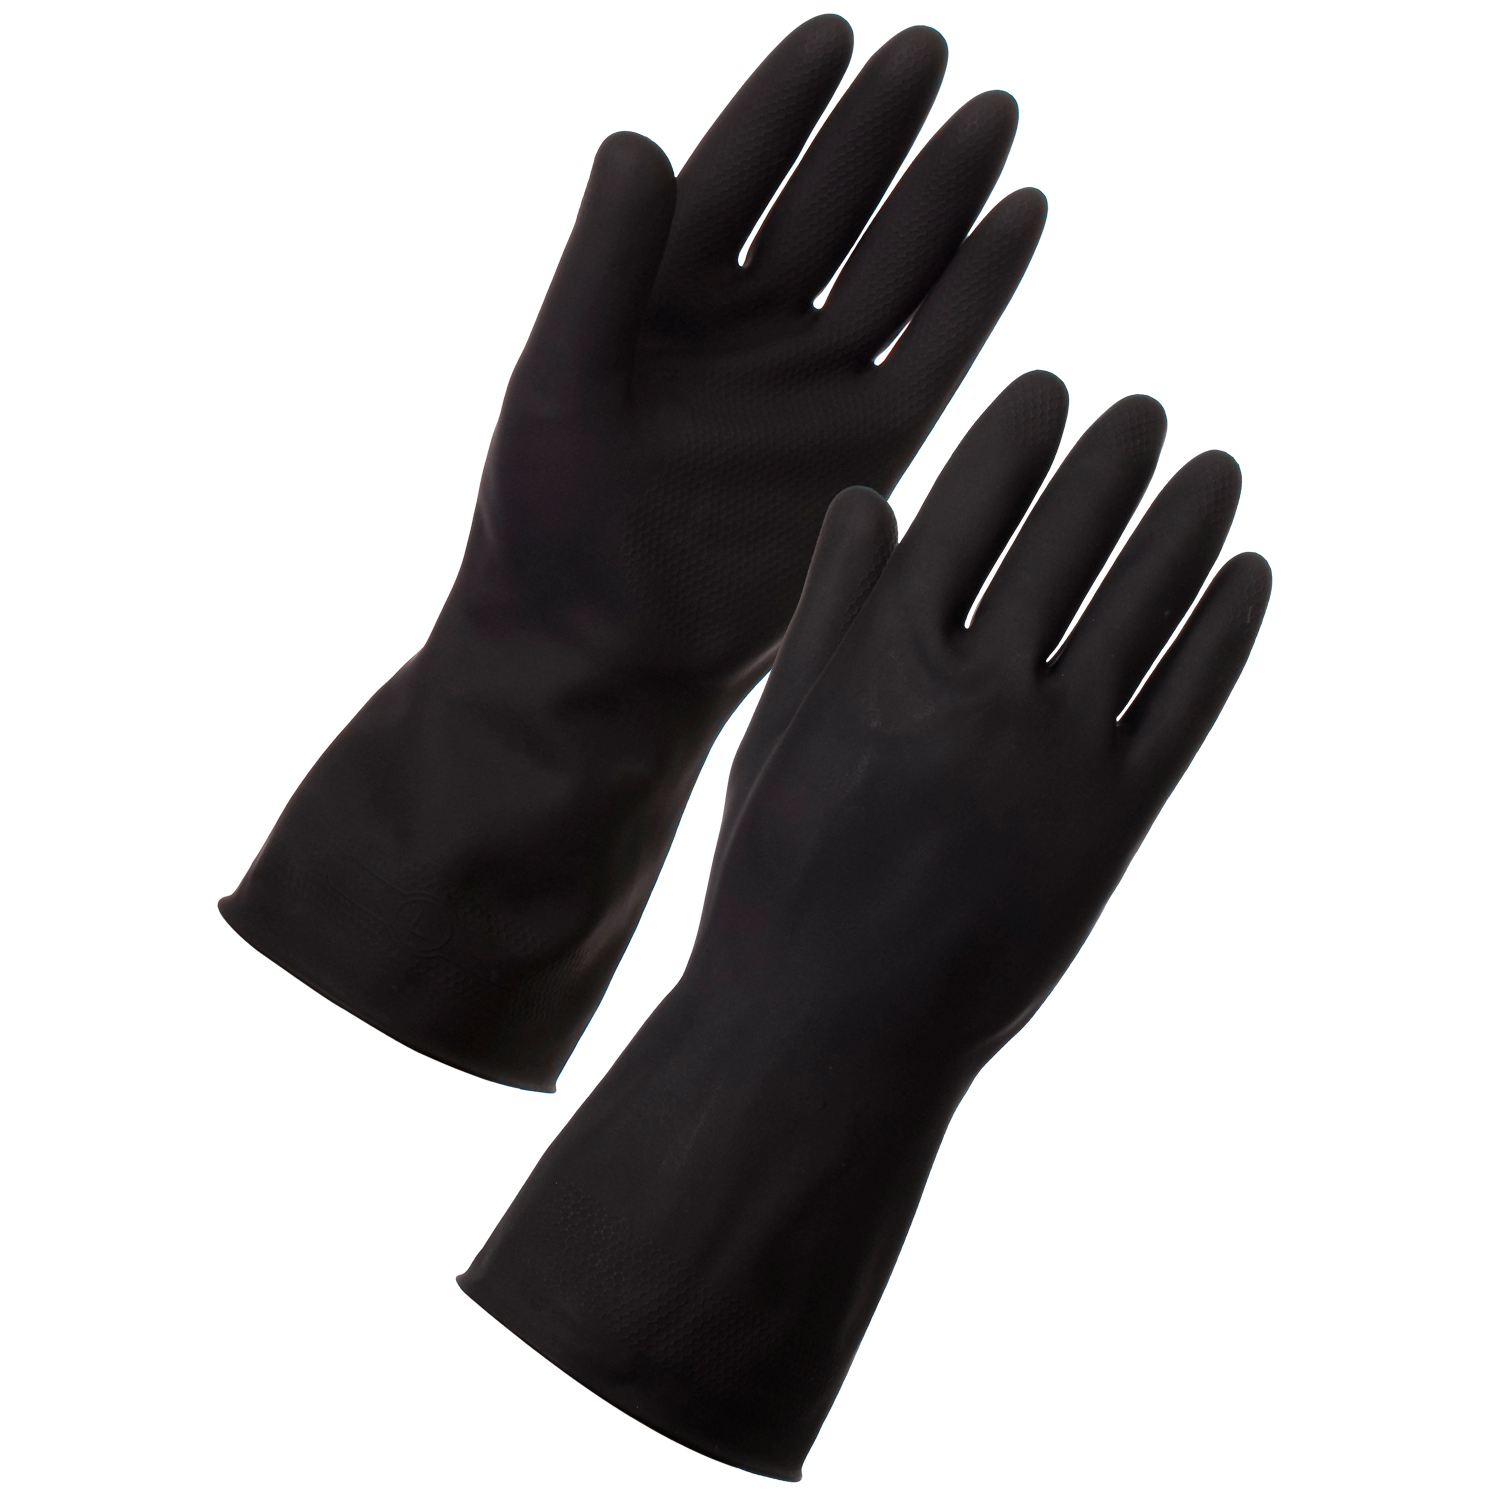 USE G001L - Shield 2 Heavy Weight Black Gloves (Pair) LARGE